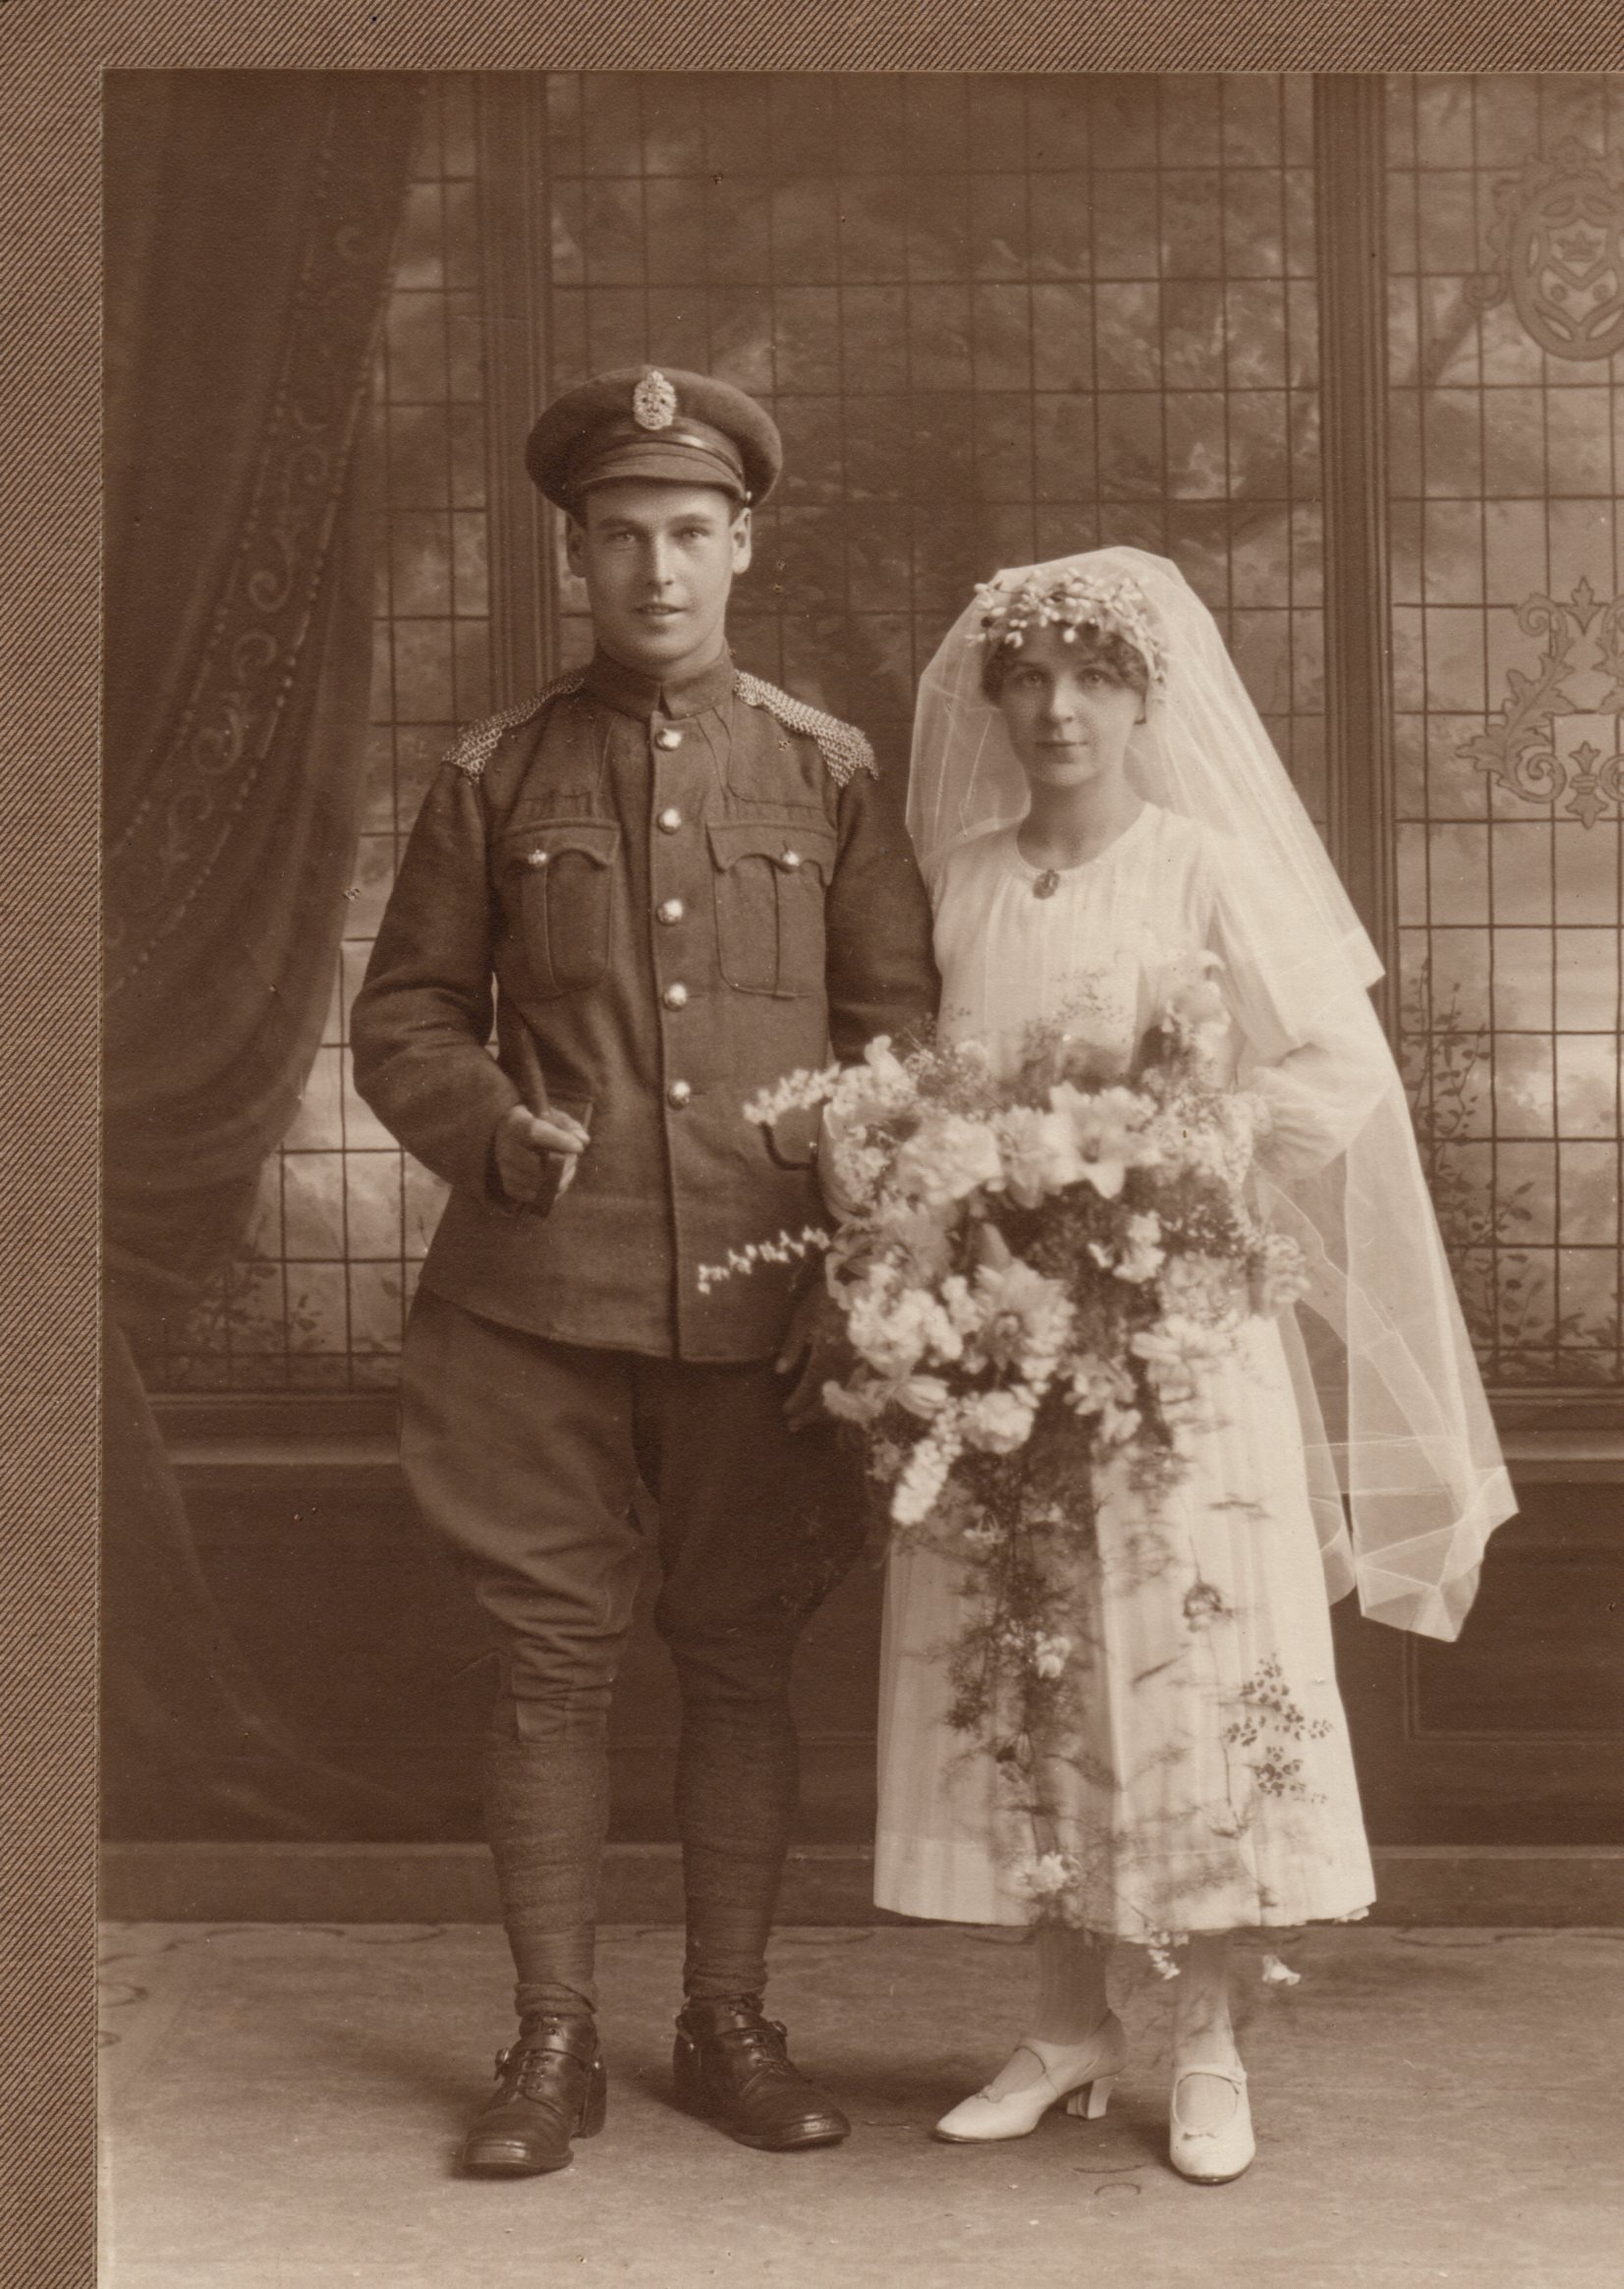 Private of 2nd King Edward’s Horse in Service Dress with shoulder chains and cloth leggings on his wedding day circa 1915. He is wearing a 2nd King Edward’s Horse headdress badge and 2KEH shoulder titles (Peter Nemaric collection).